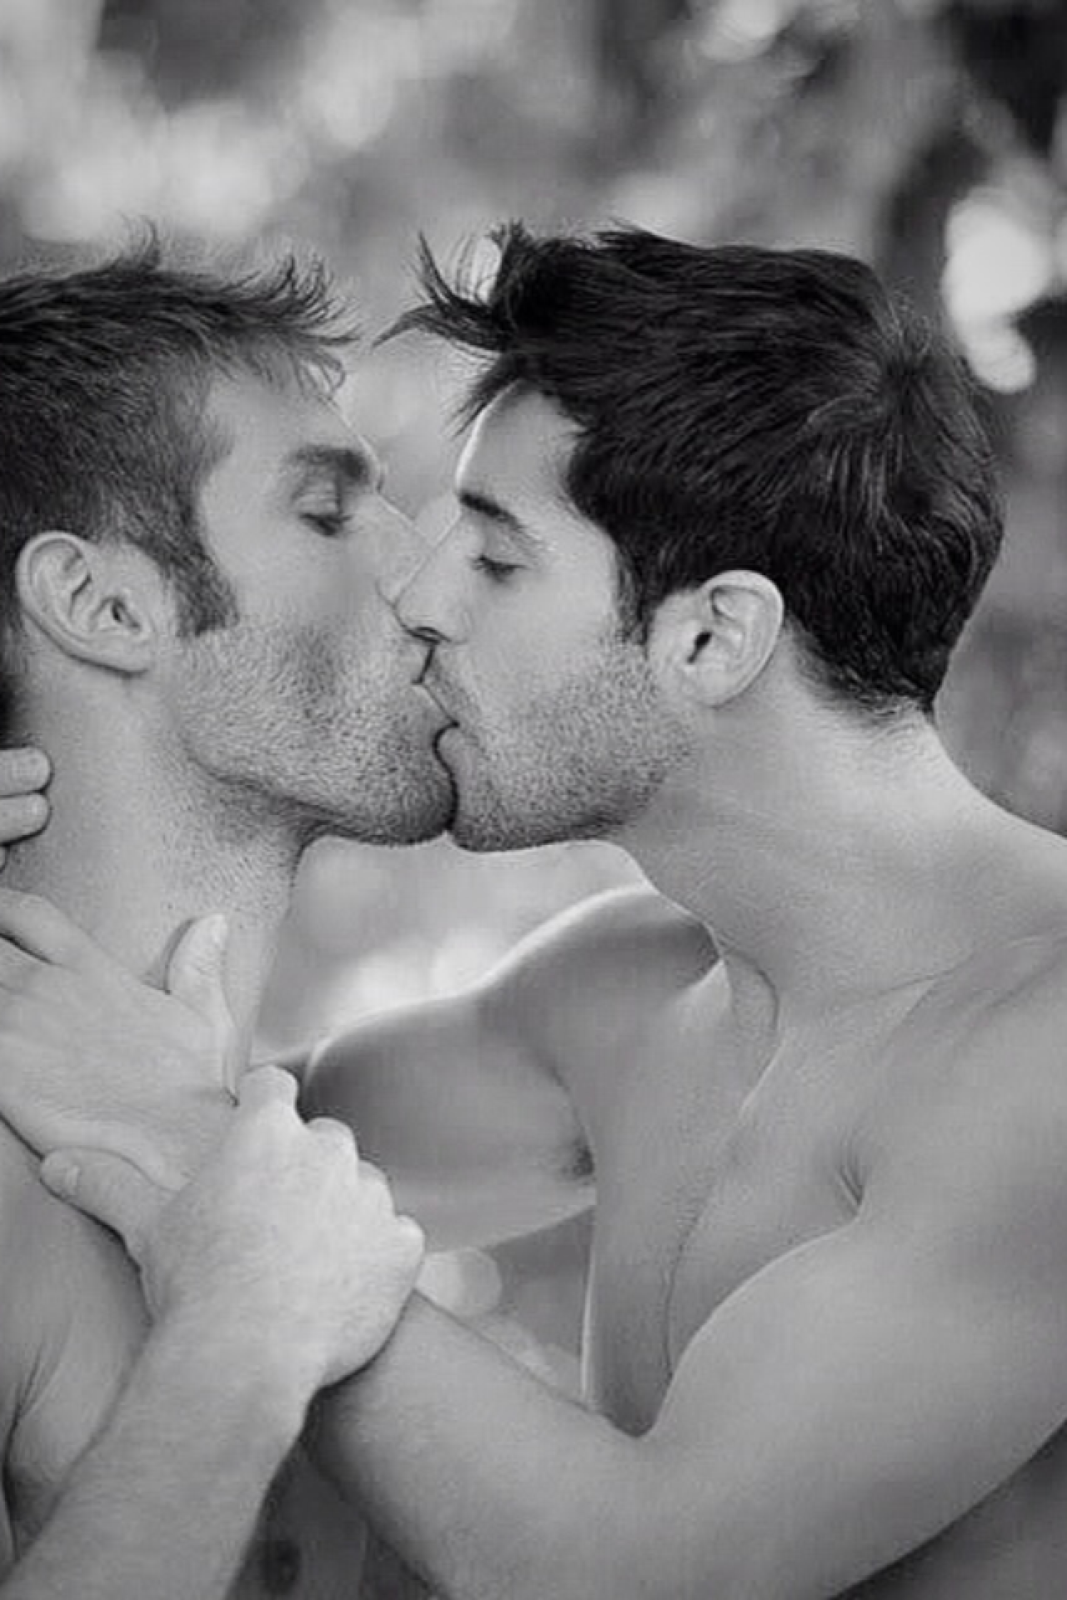 Loving, lusty, and naked: stunning images of gay men kissing